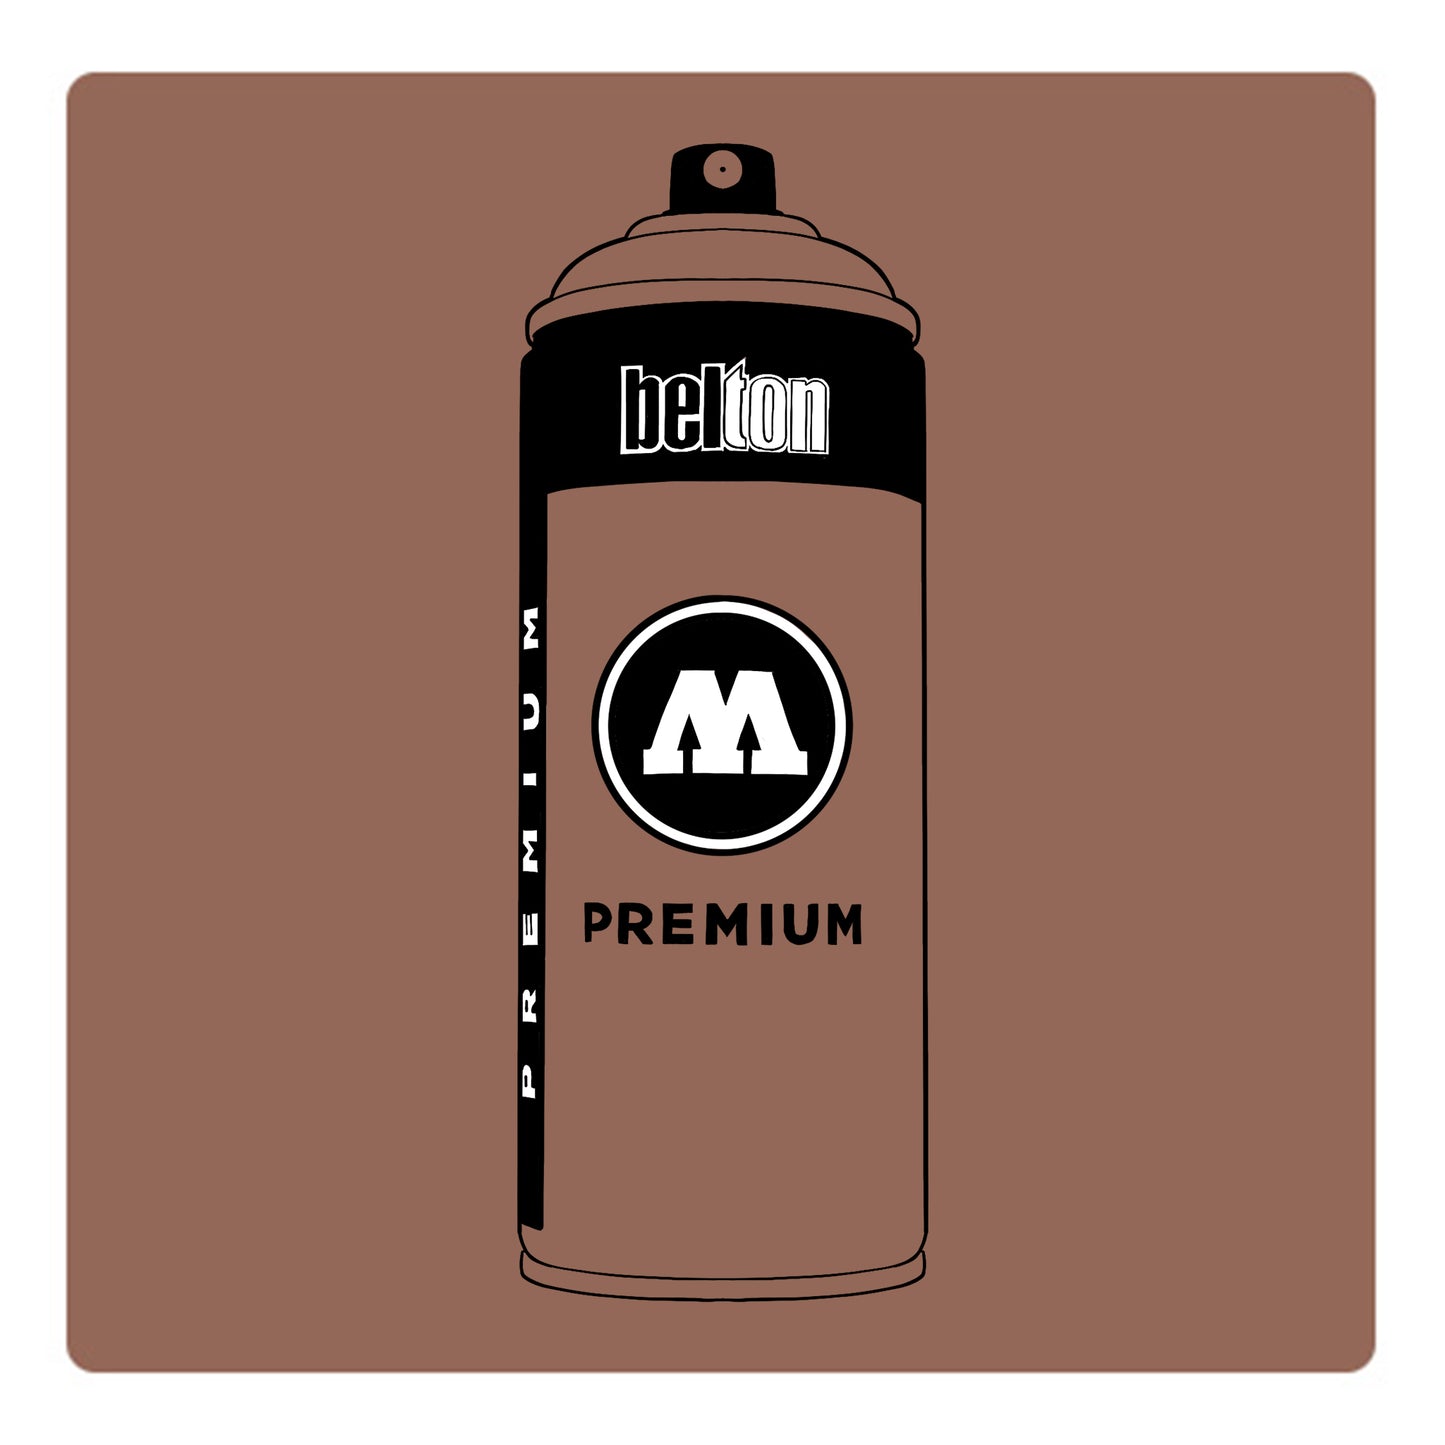 A black outline drawing of a pinkish pastel brown spray paint can with the words "belton","premium" and the letter"M" written on the face in black and white font. The background is a color swatch of the same pinkish pastel brown with a white border